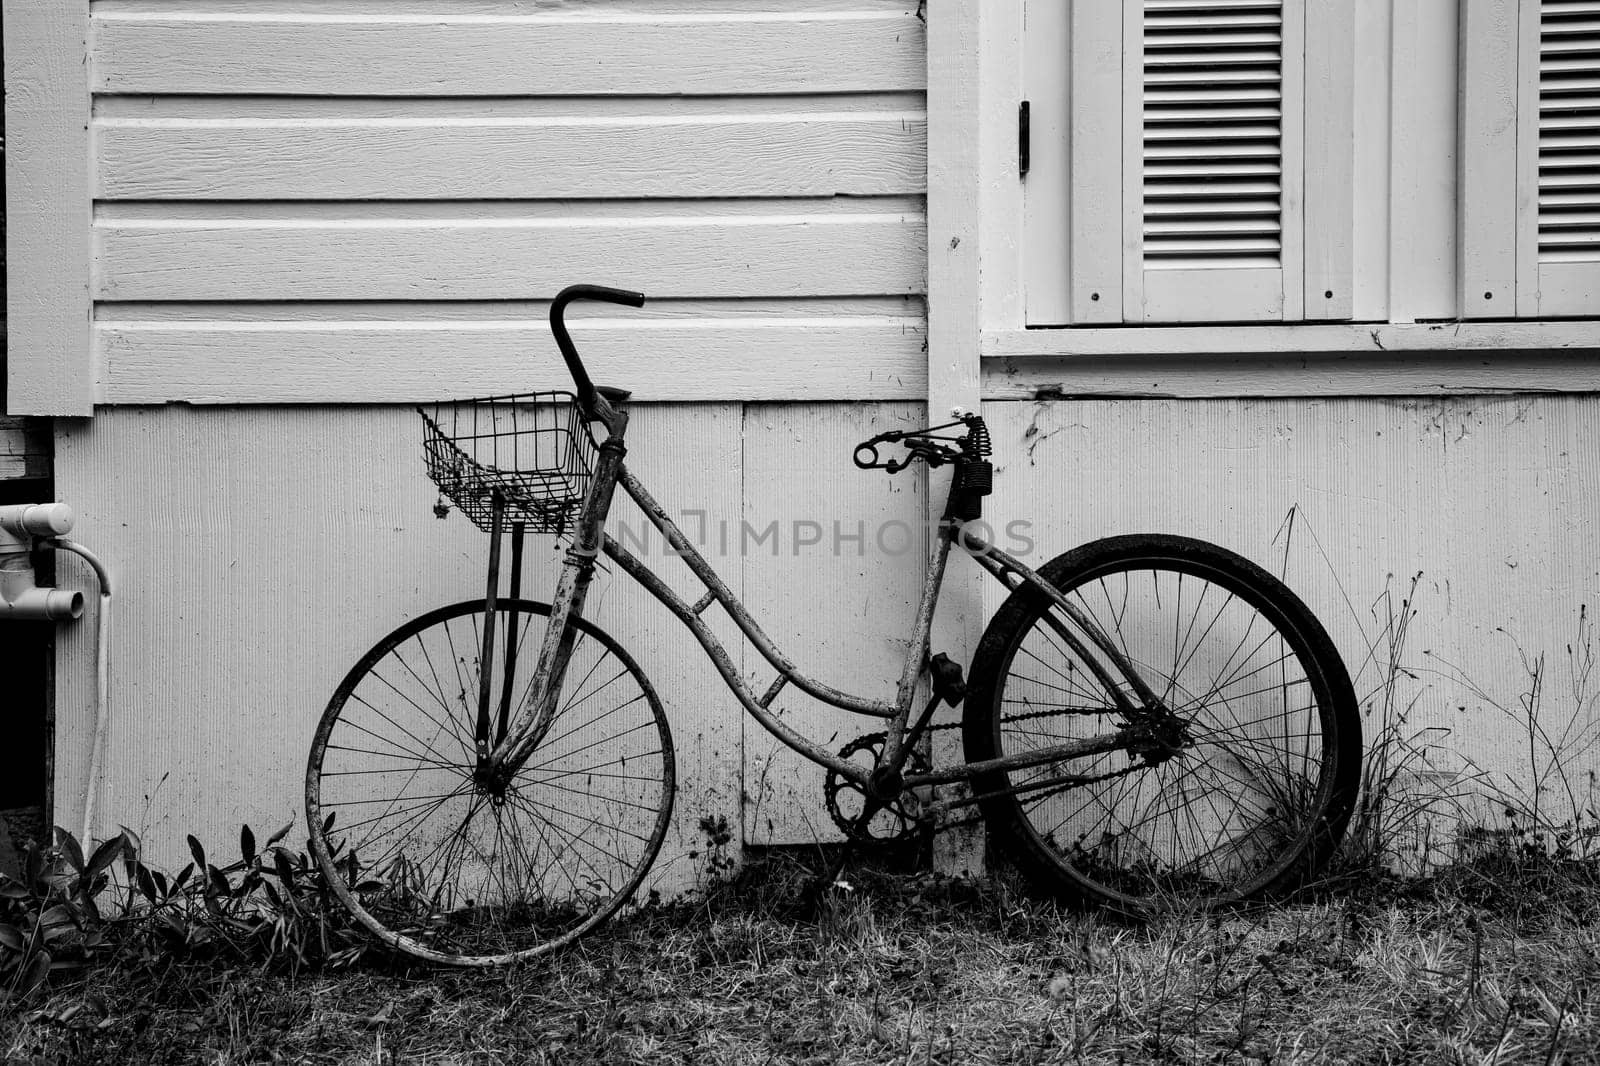 An old bicycle leaning against a house with a metal basket on the front in black and white by Granchinho